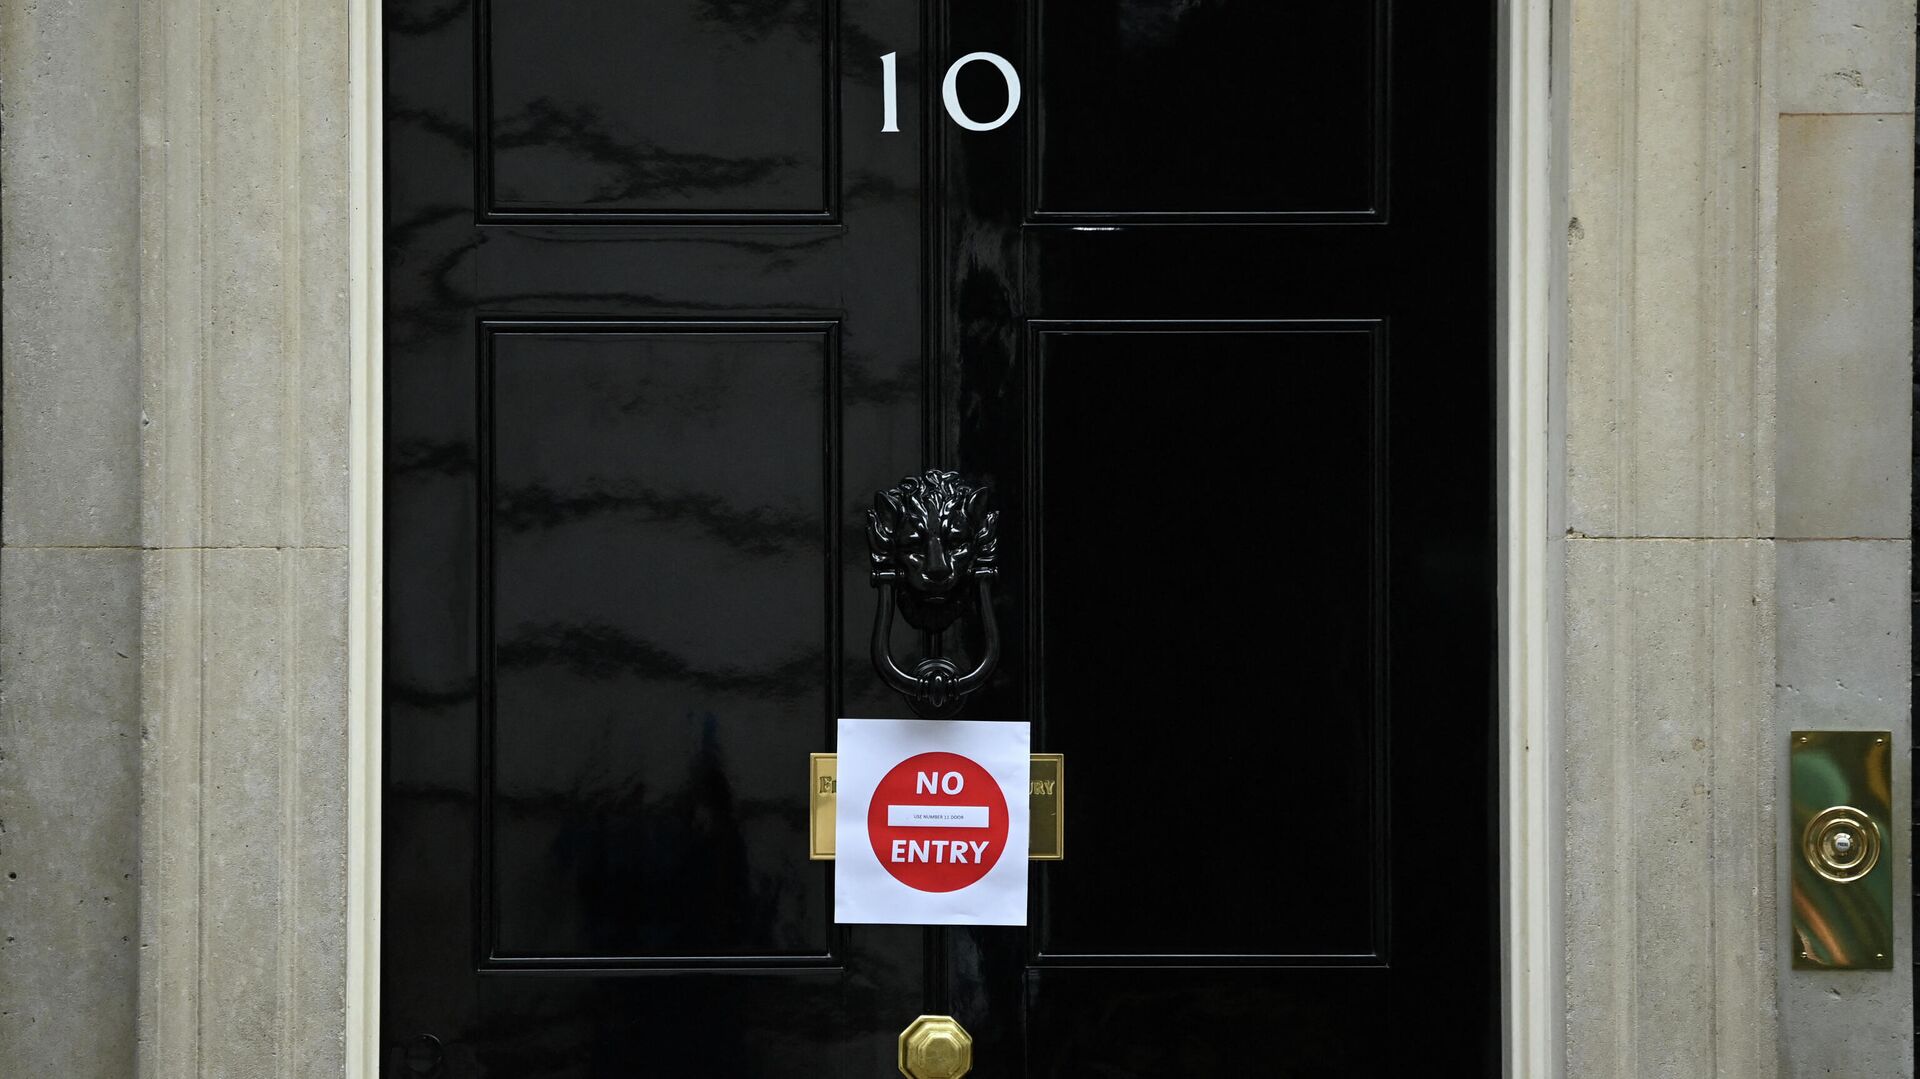 A 'no entry' sign is pictured attached to the front door of 10 Downing Street, the official residence of Britain's Prime Minister, in central London on November 26, 2021 - Sputnik International, 1920, 22.01.2022